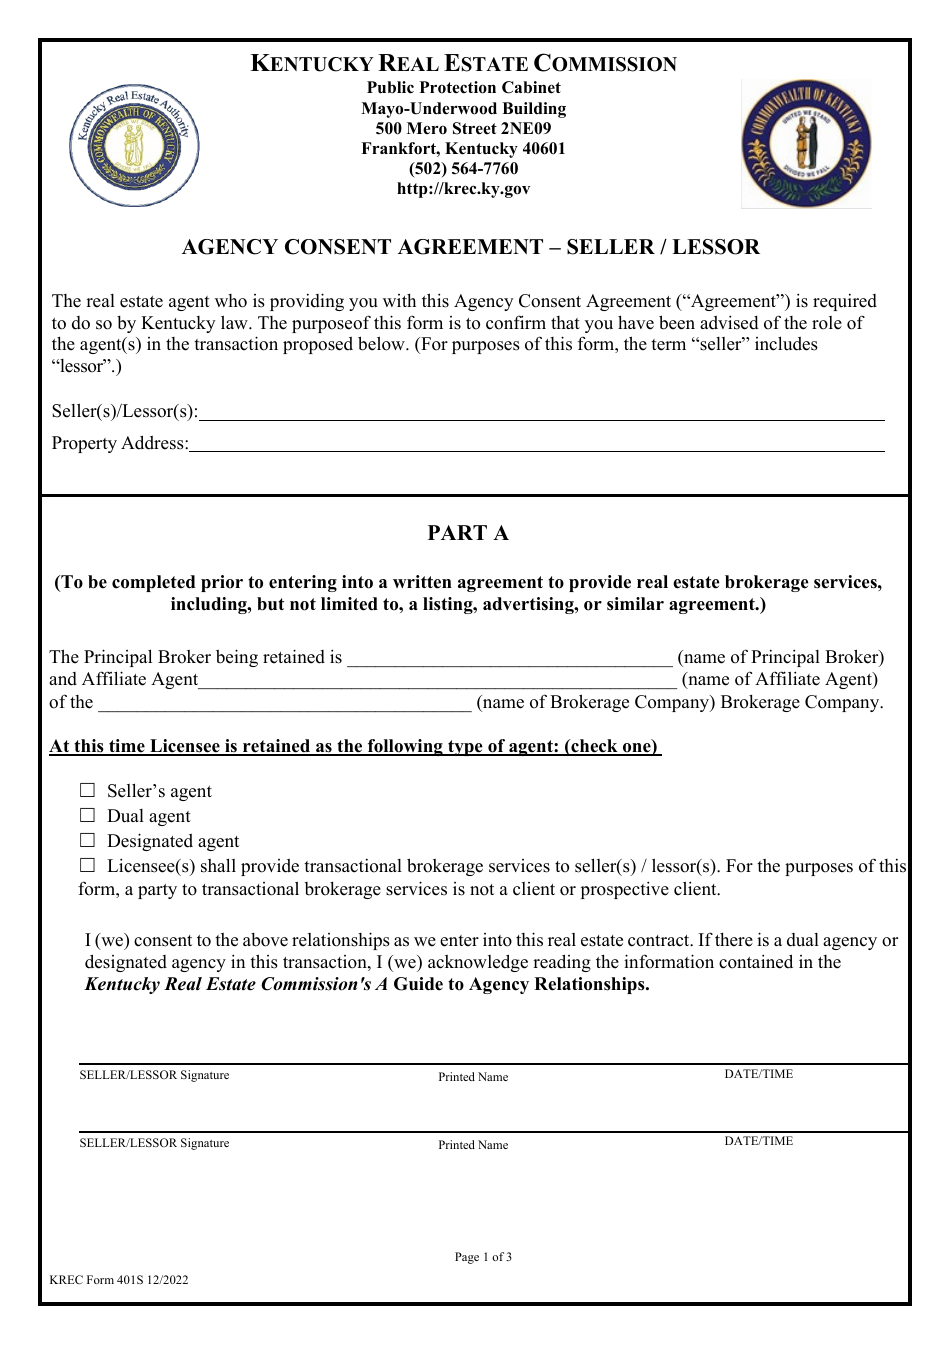 KREC Form 401S Agency Consent Agreement - Seller / Lessor - Kentucky, Page 1